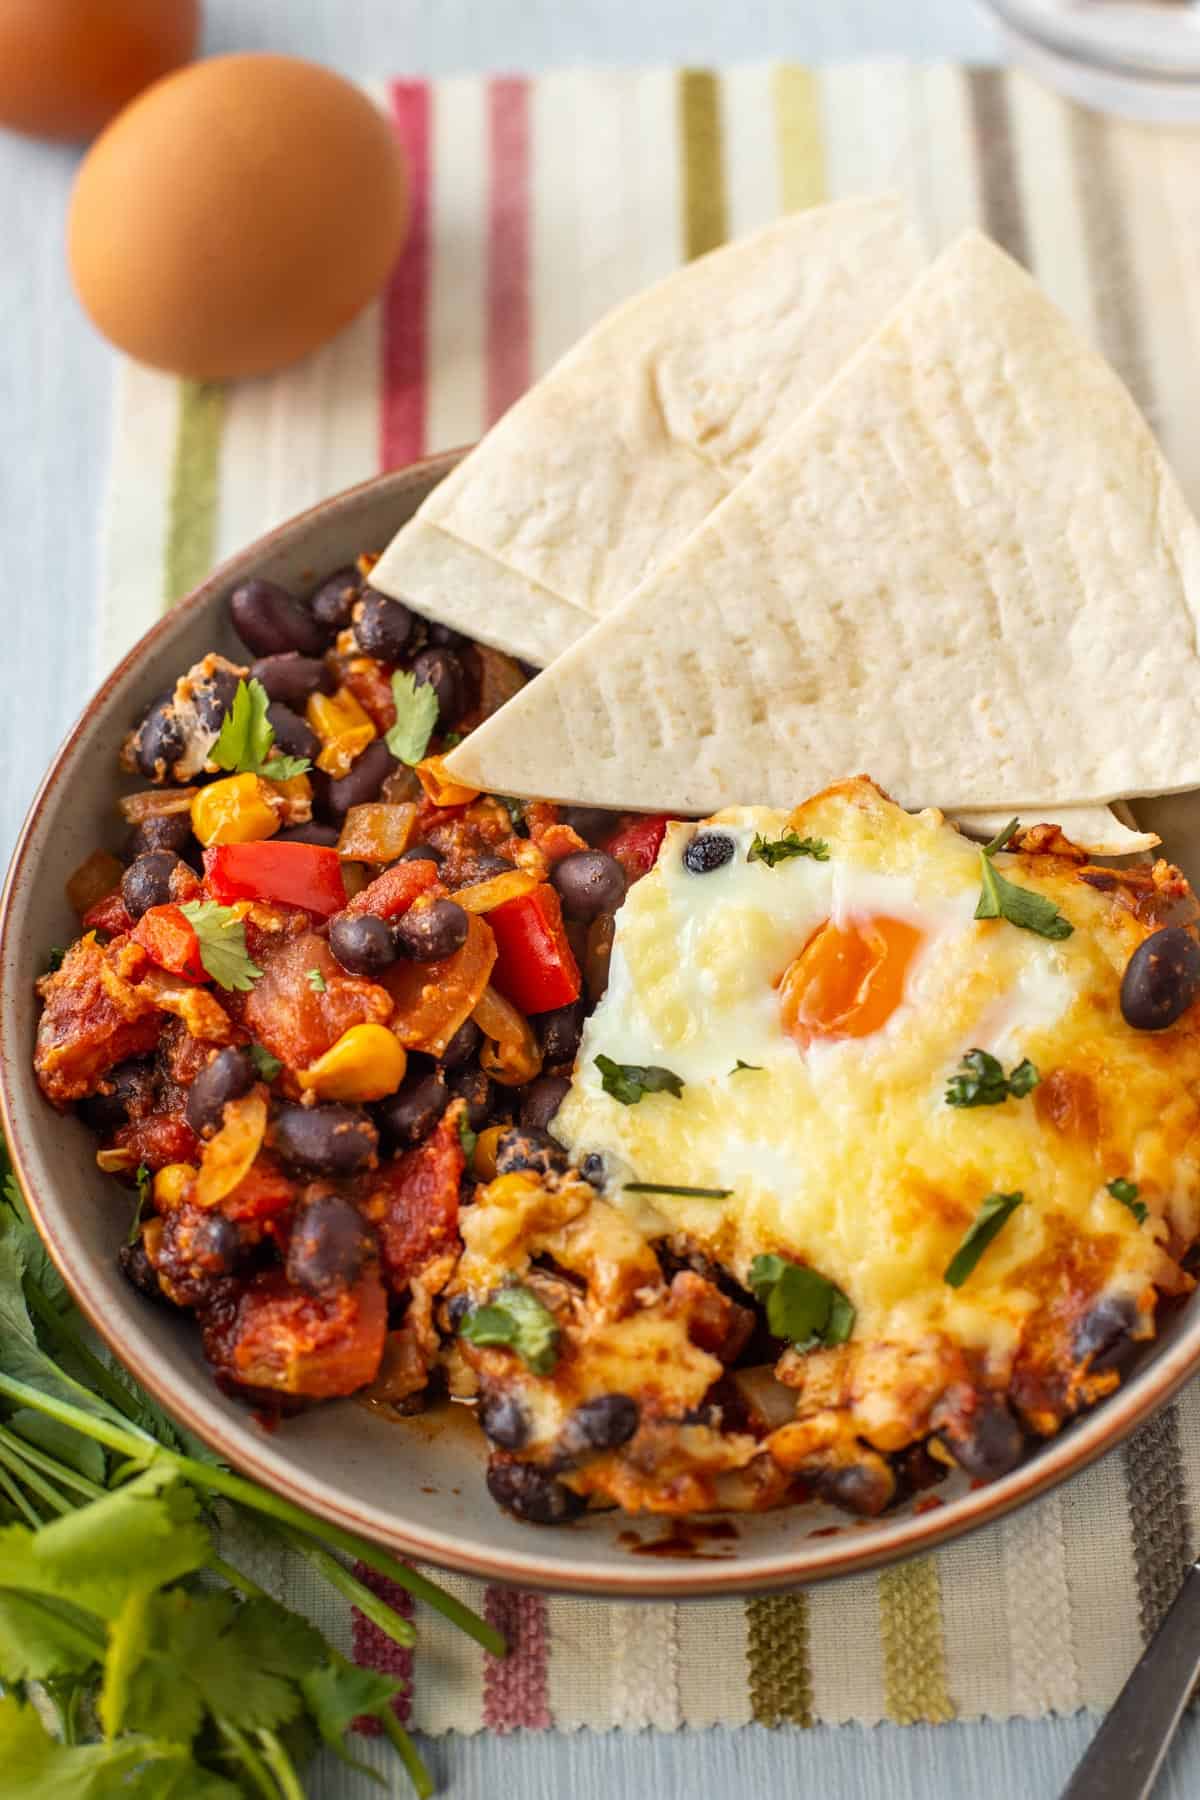 A portion of Mexican baked eggs in a bowl, with bean chilli and flour tortillas.